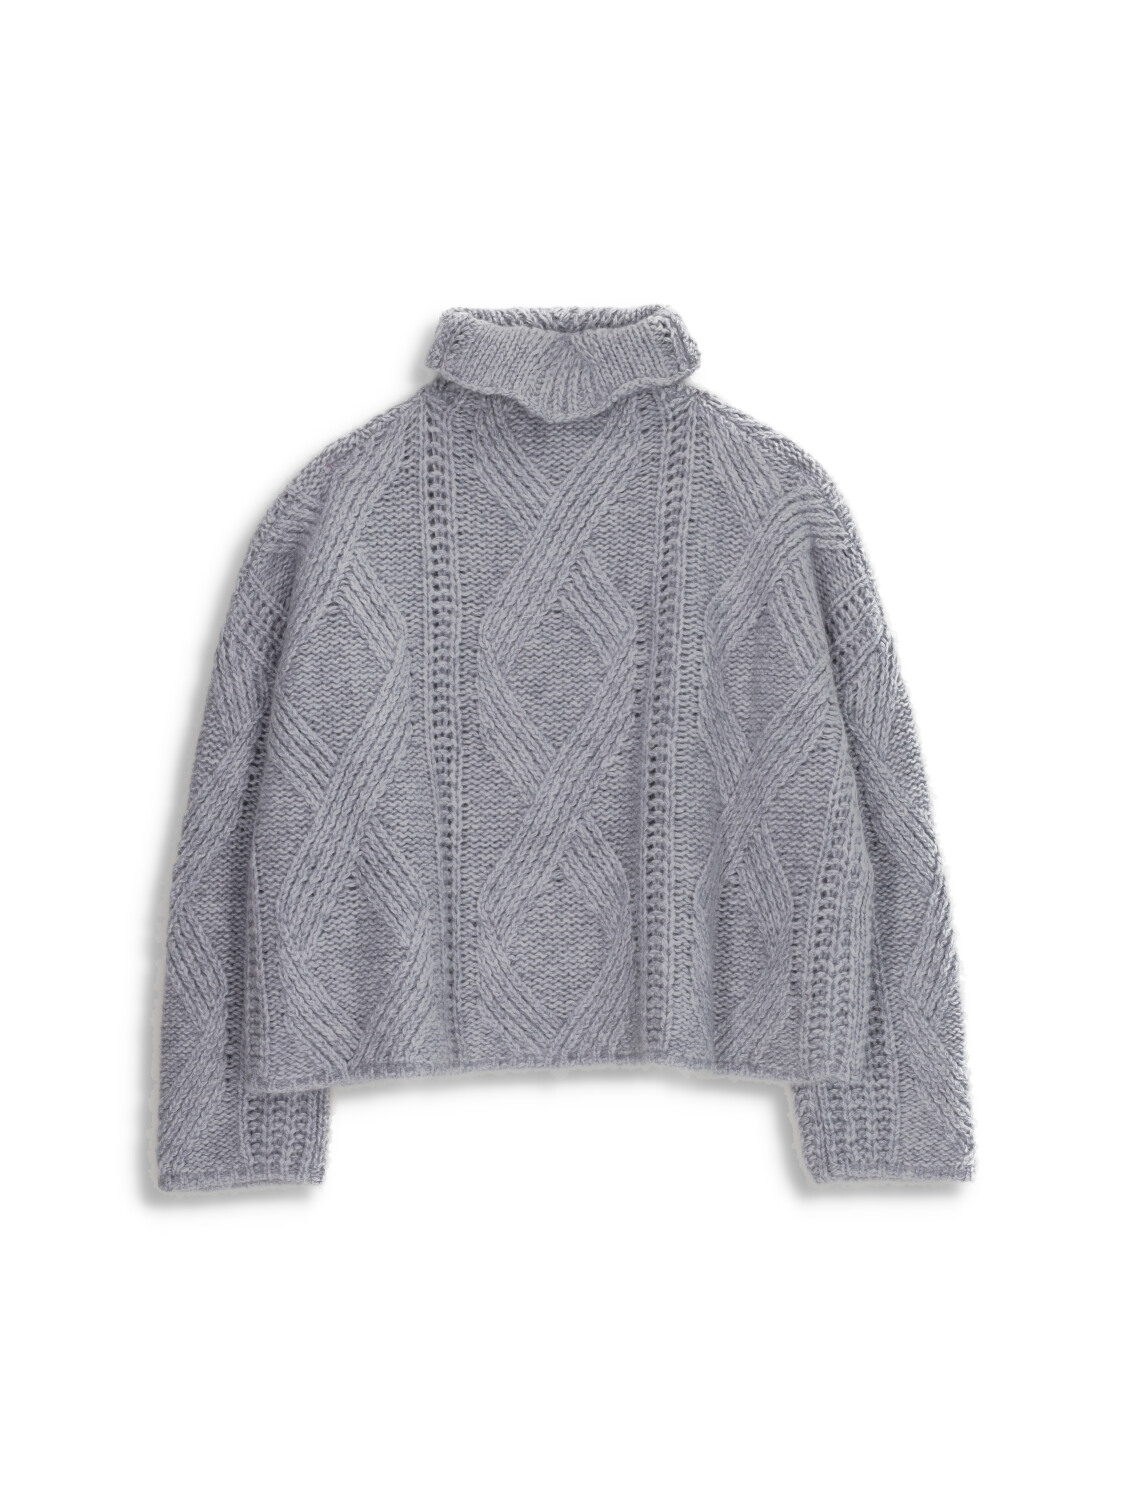 Imperial - Oversized turtleneck sweater with braided pattern